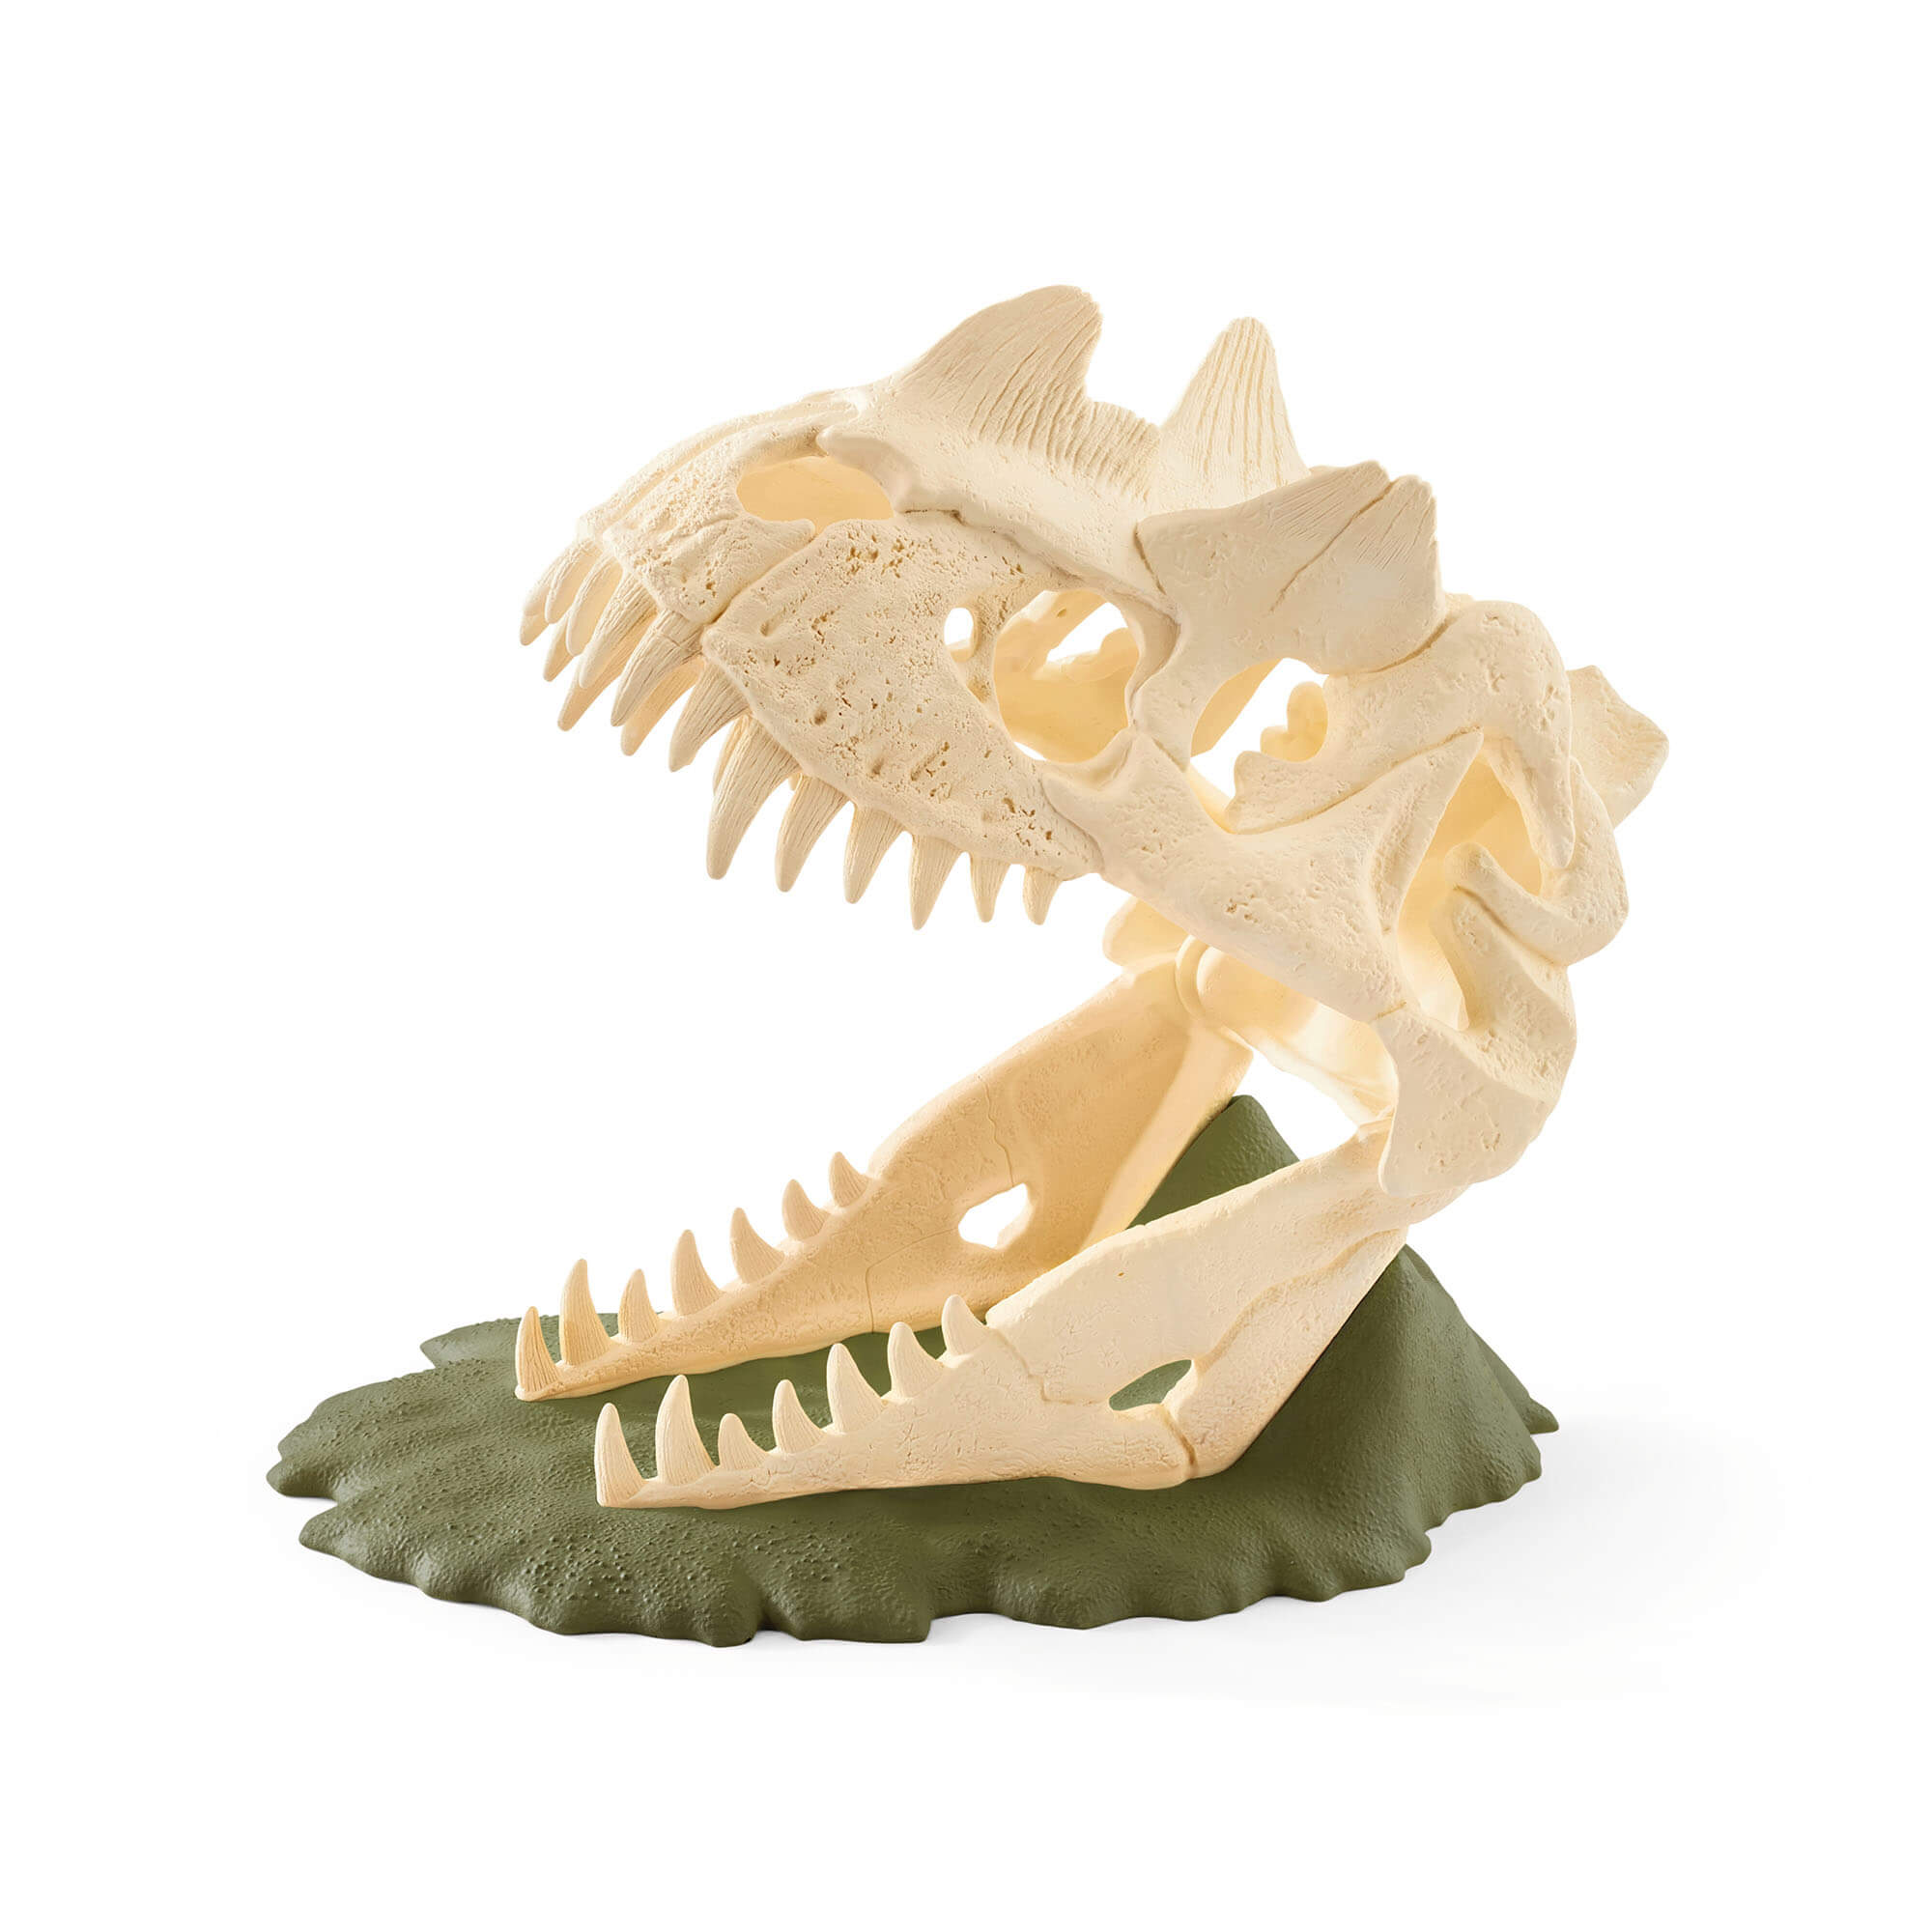 Schleich Dinosaurs Large Skull Trap With Velociraptor Play Set